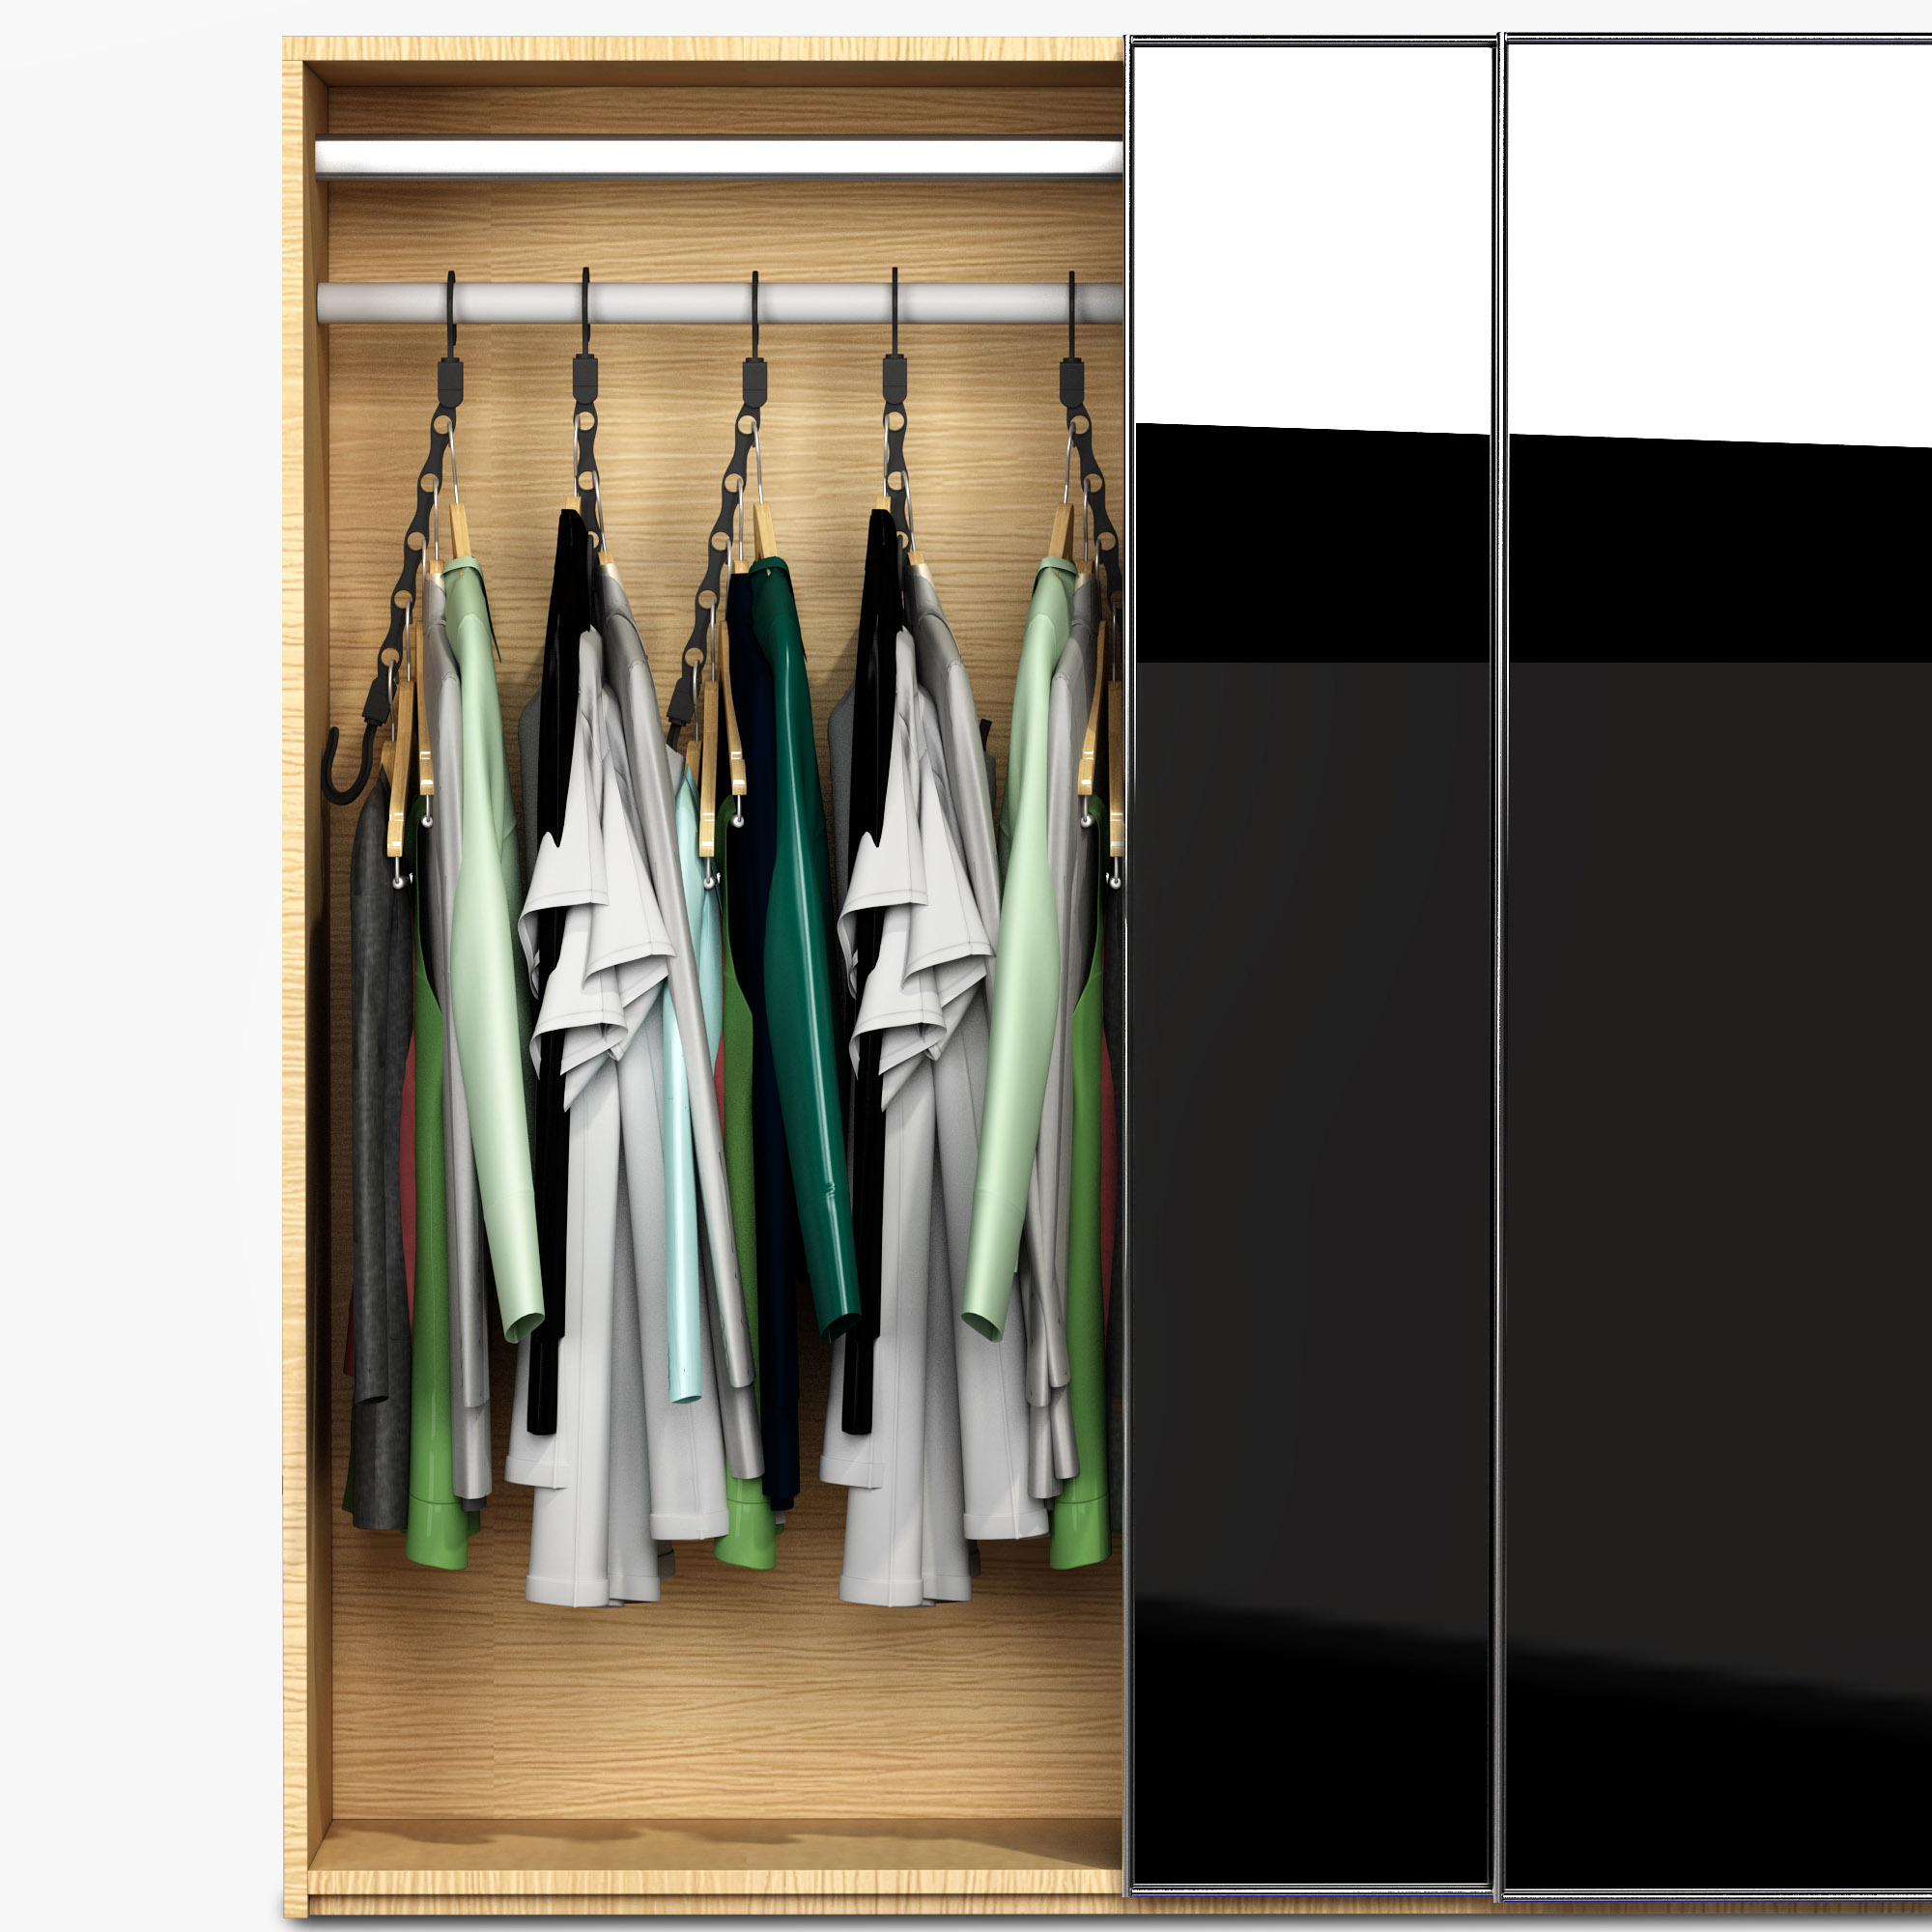 Space Saving Closet Organization Vertical and Horizontal Multi Hanger for Shirts, Pants, and Coats, All Your Dorm Room Essentials by Everyday Home - image 5 of 6